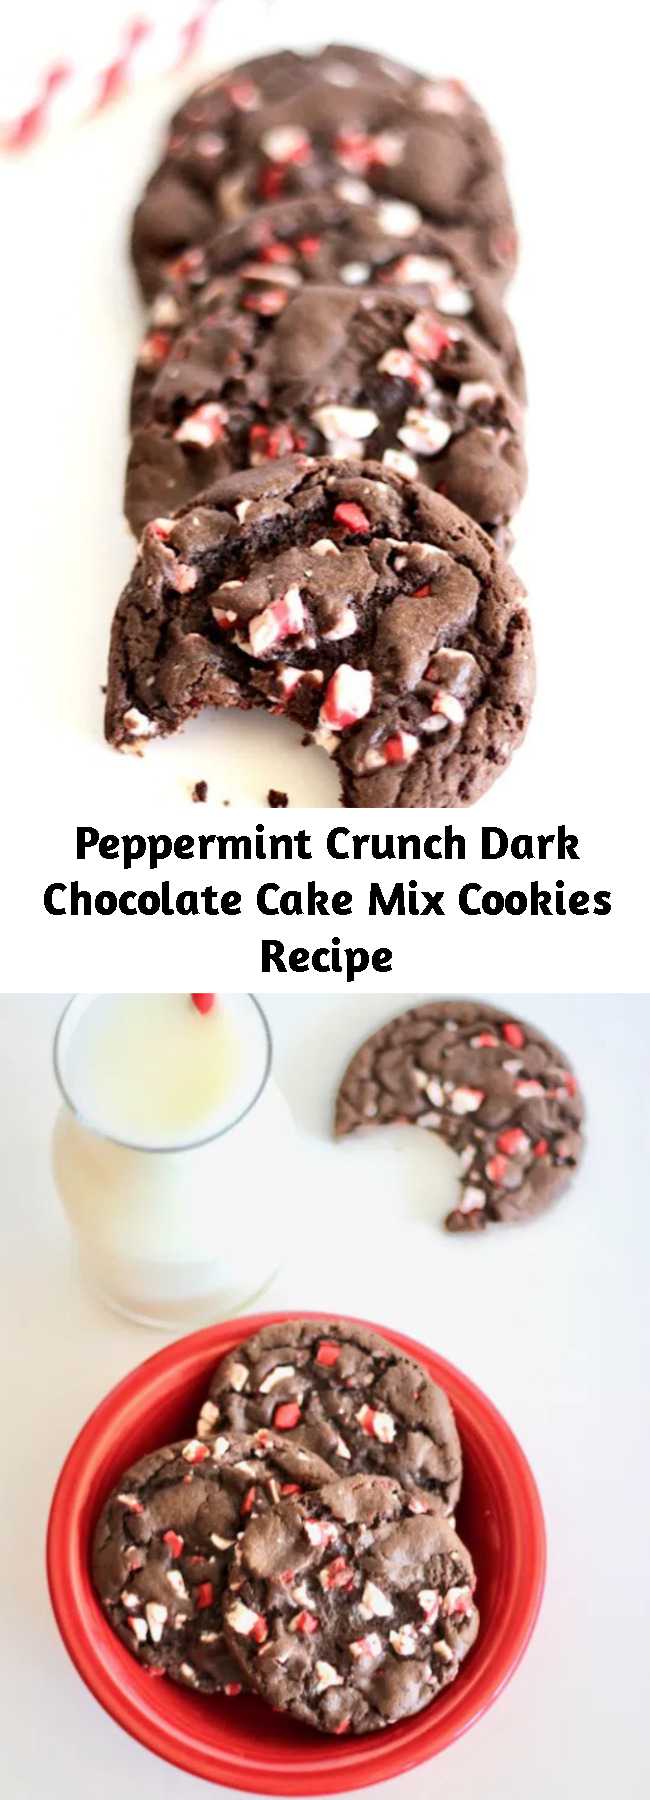 Peppermint Crunch Dark Chocolate Cake Mix Cookies Recipe - These dreamy Peppermint Crunch Dark Chocolate Cake Mix Cookies taste just like Christmas with every bite!